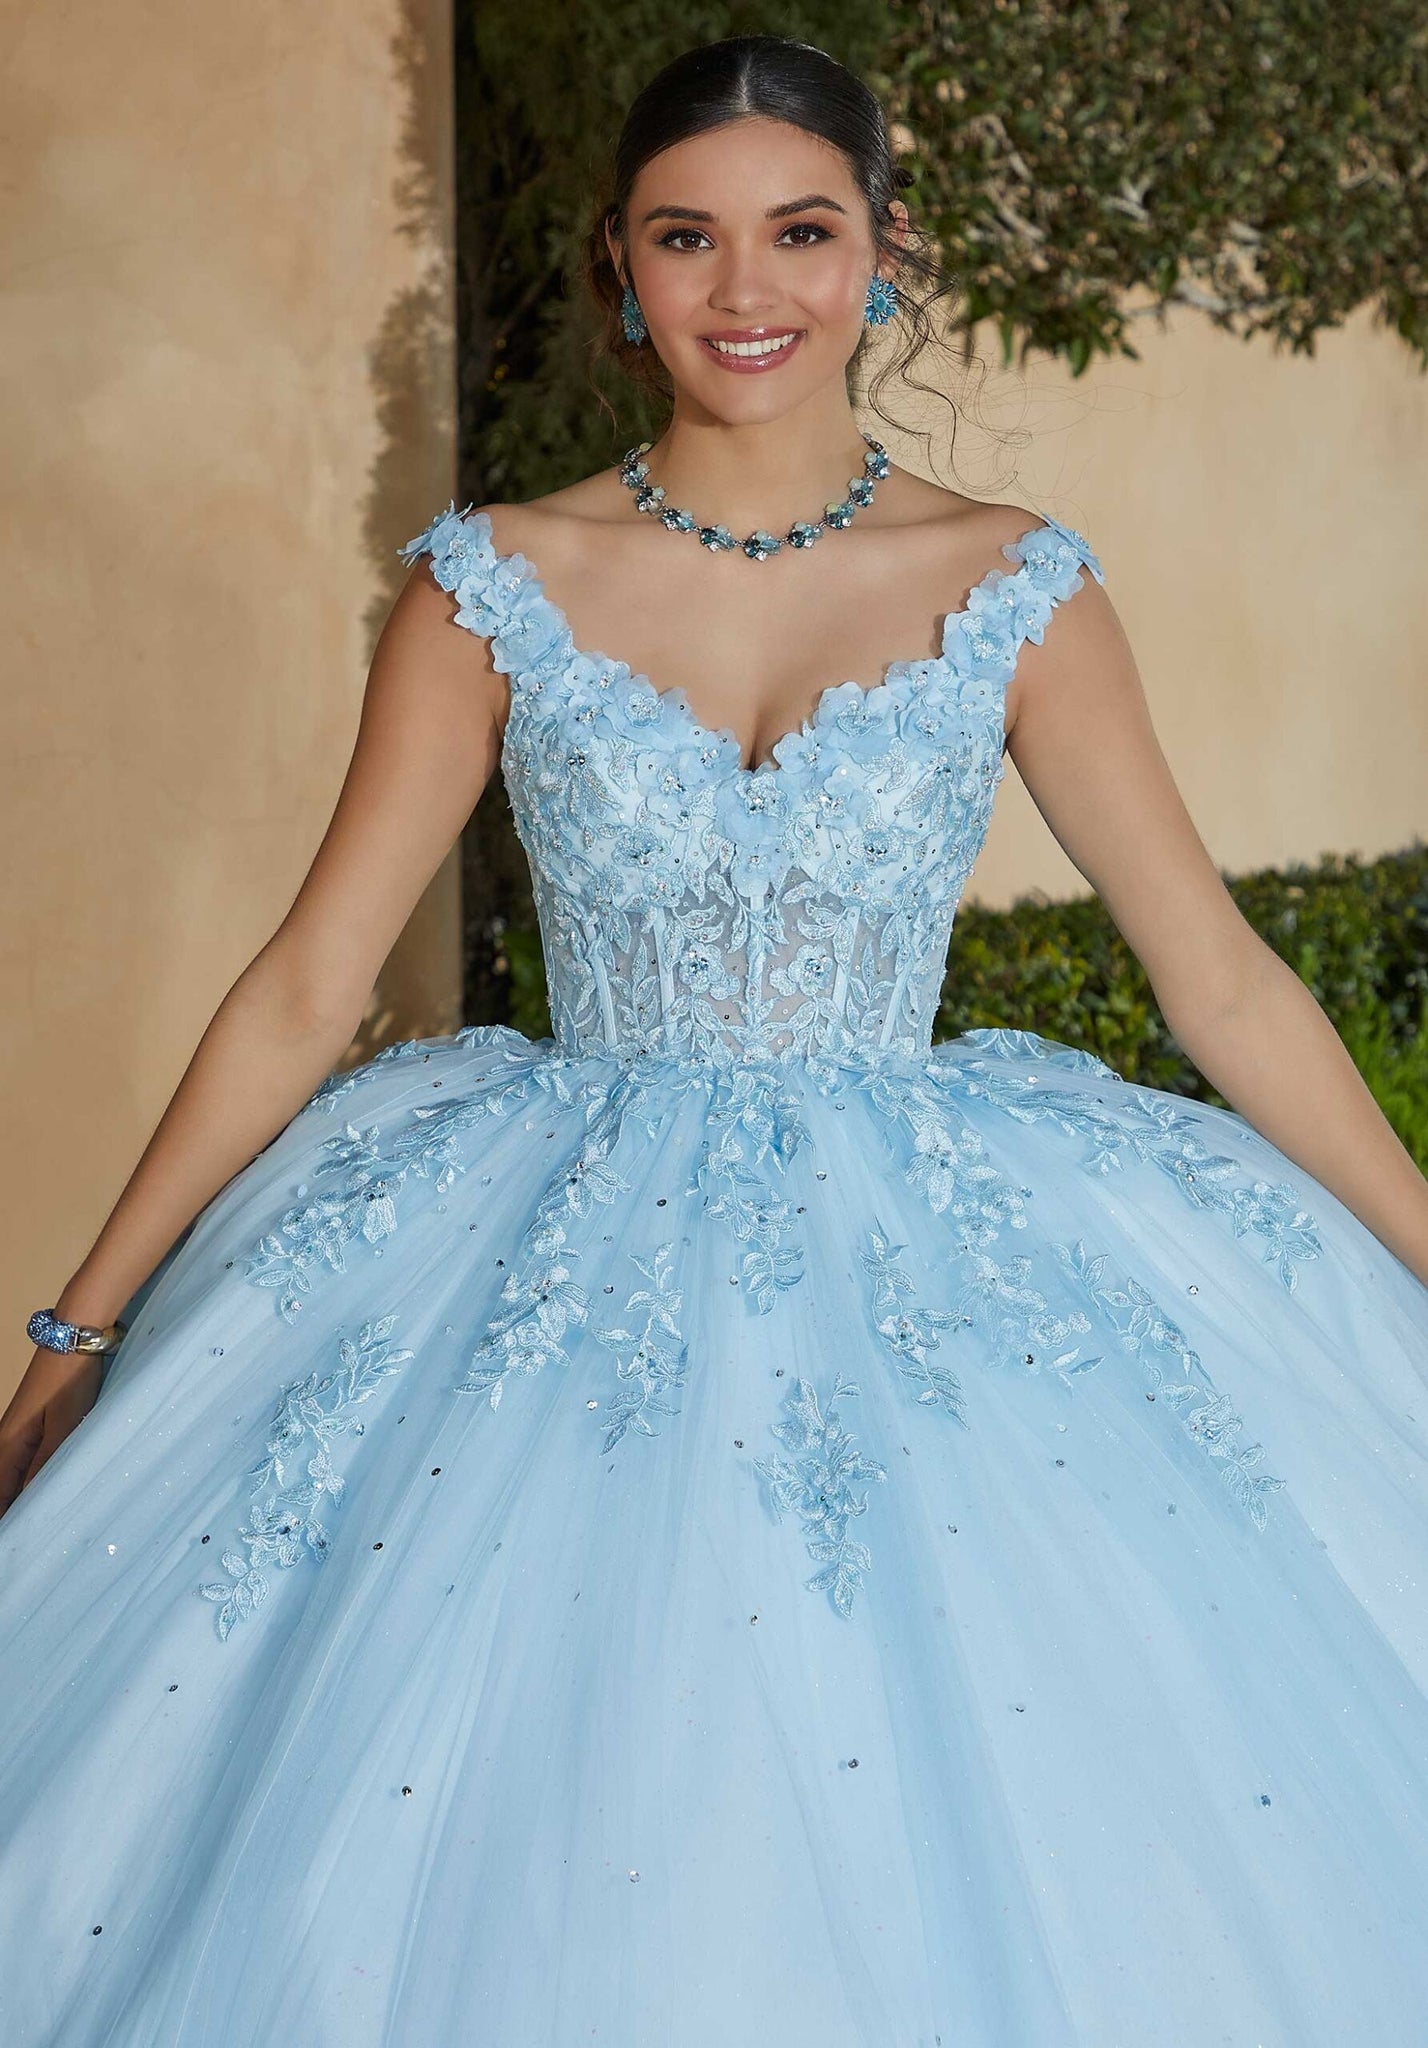 Floral Lace Quinceañera Dress with Crystal Beading